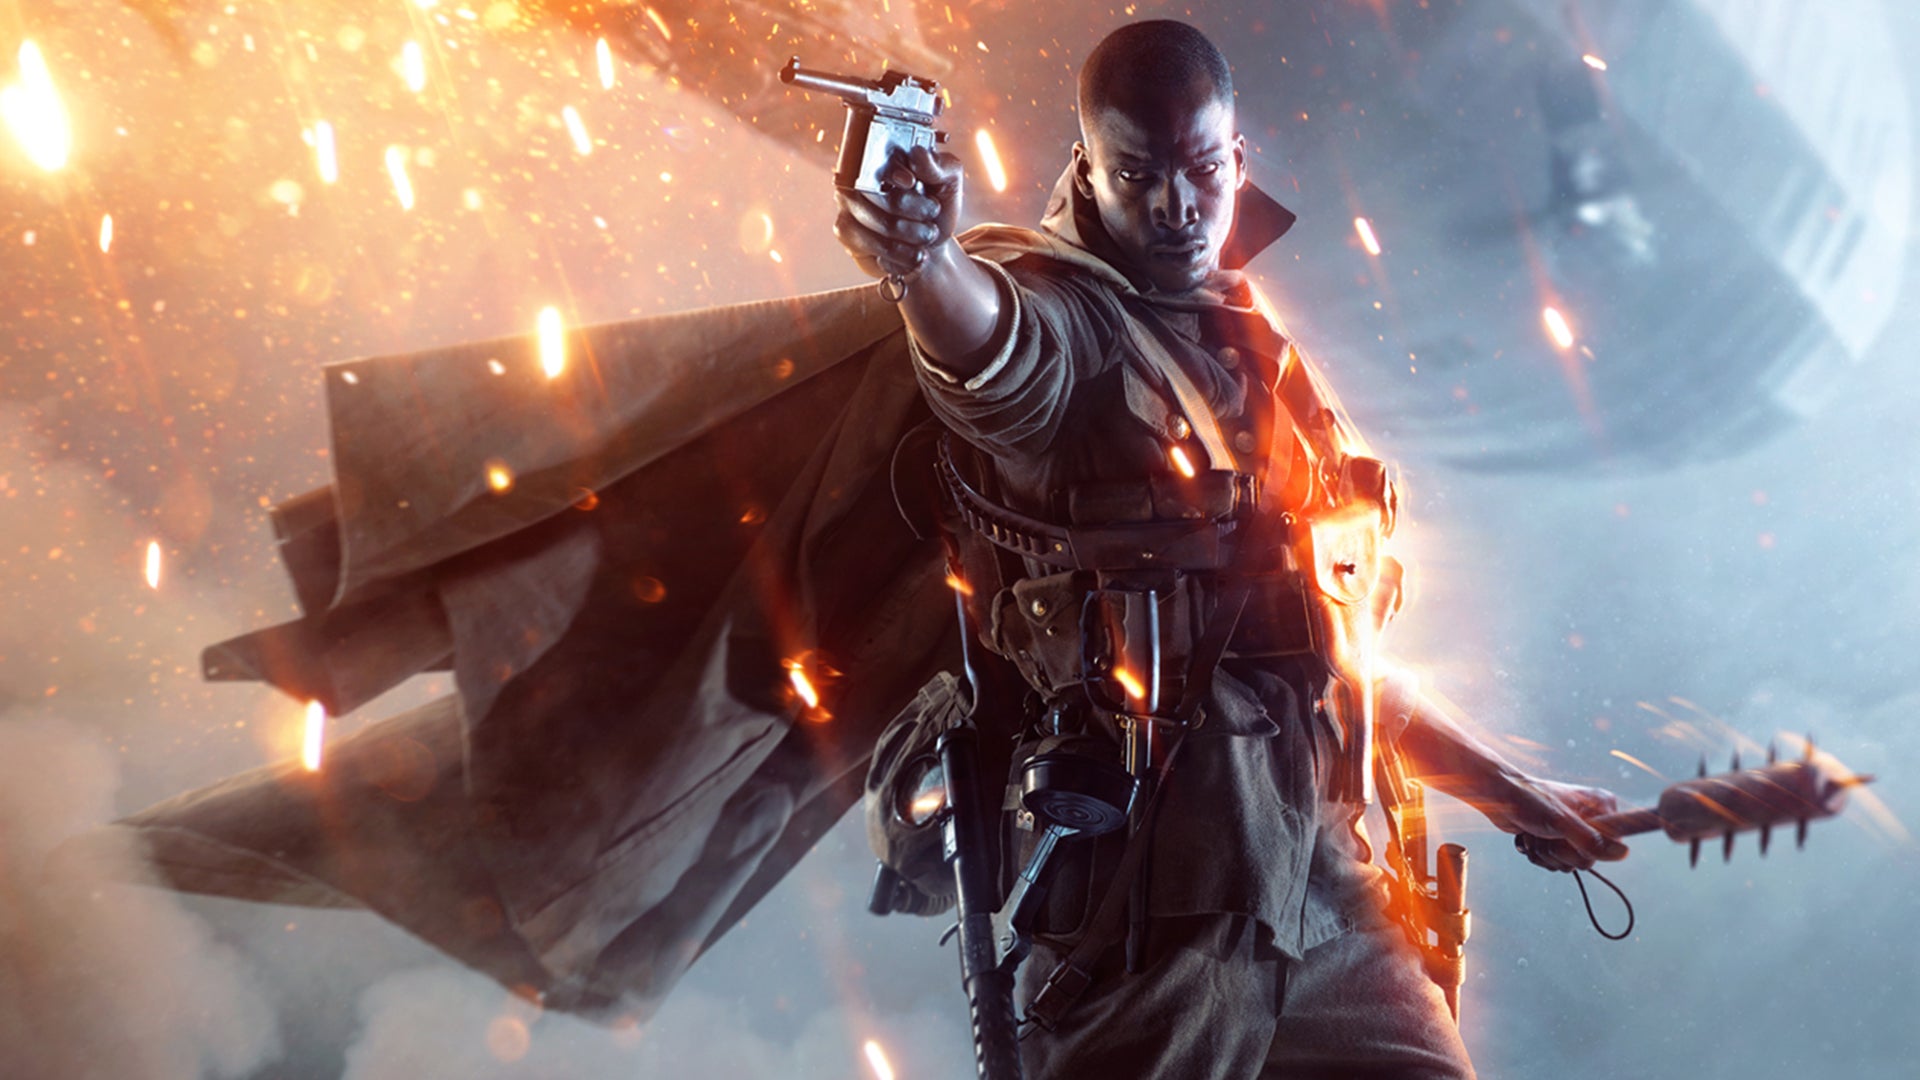 Image for Battlefield 1 on Xbox One X - The Best 4K Support on Console!